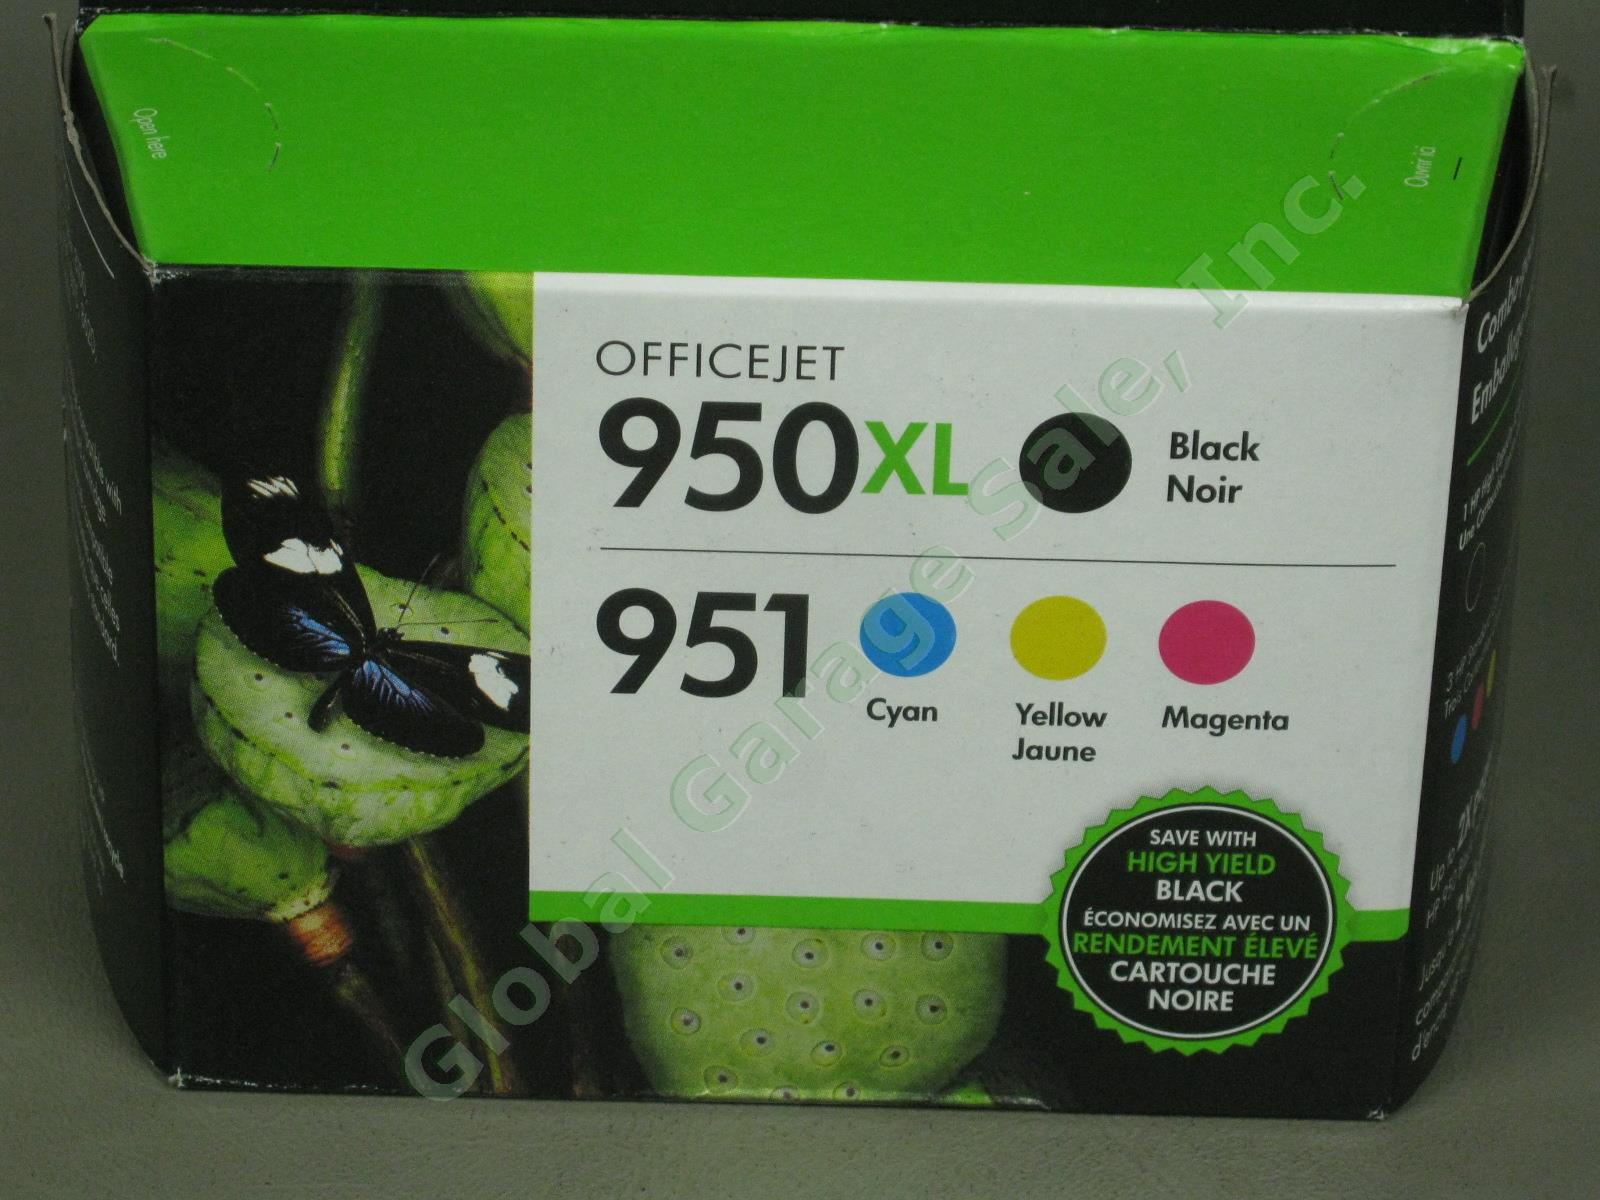 NEW Sealed Genuine HP Officejet 4 Ink Cartridge Combo Pack 950XL Black 951 Color 1